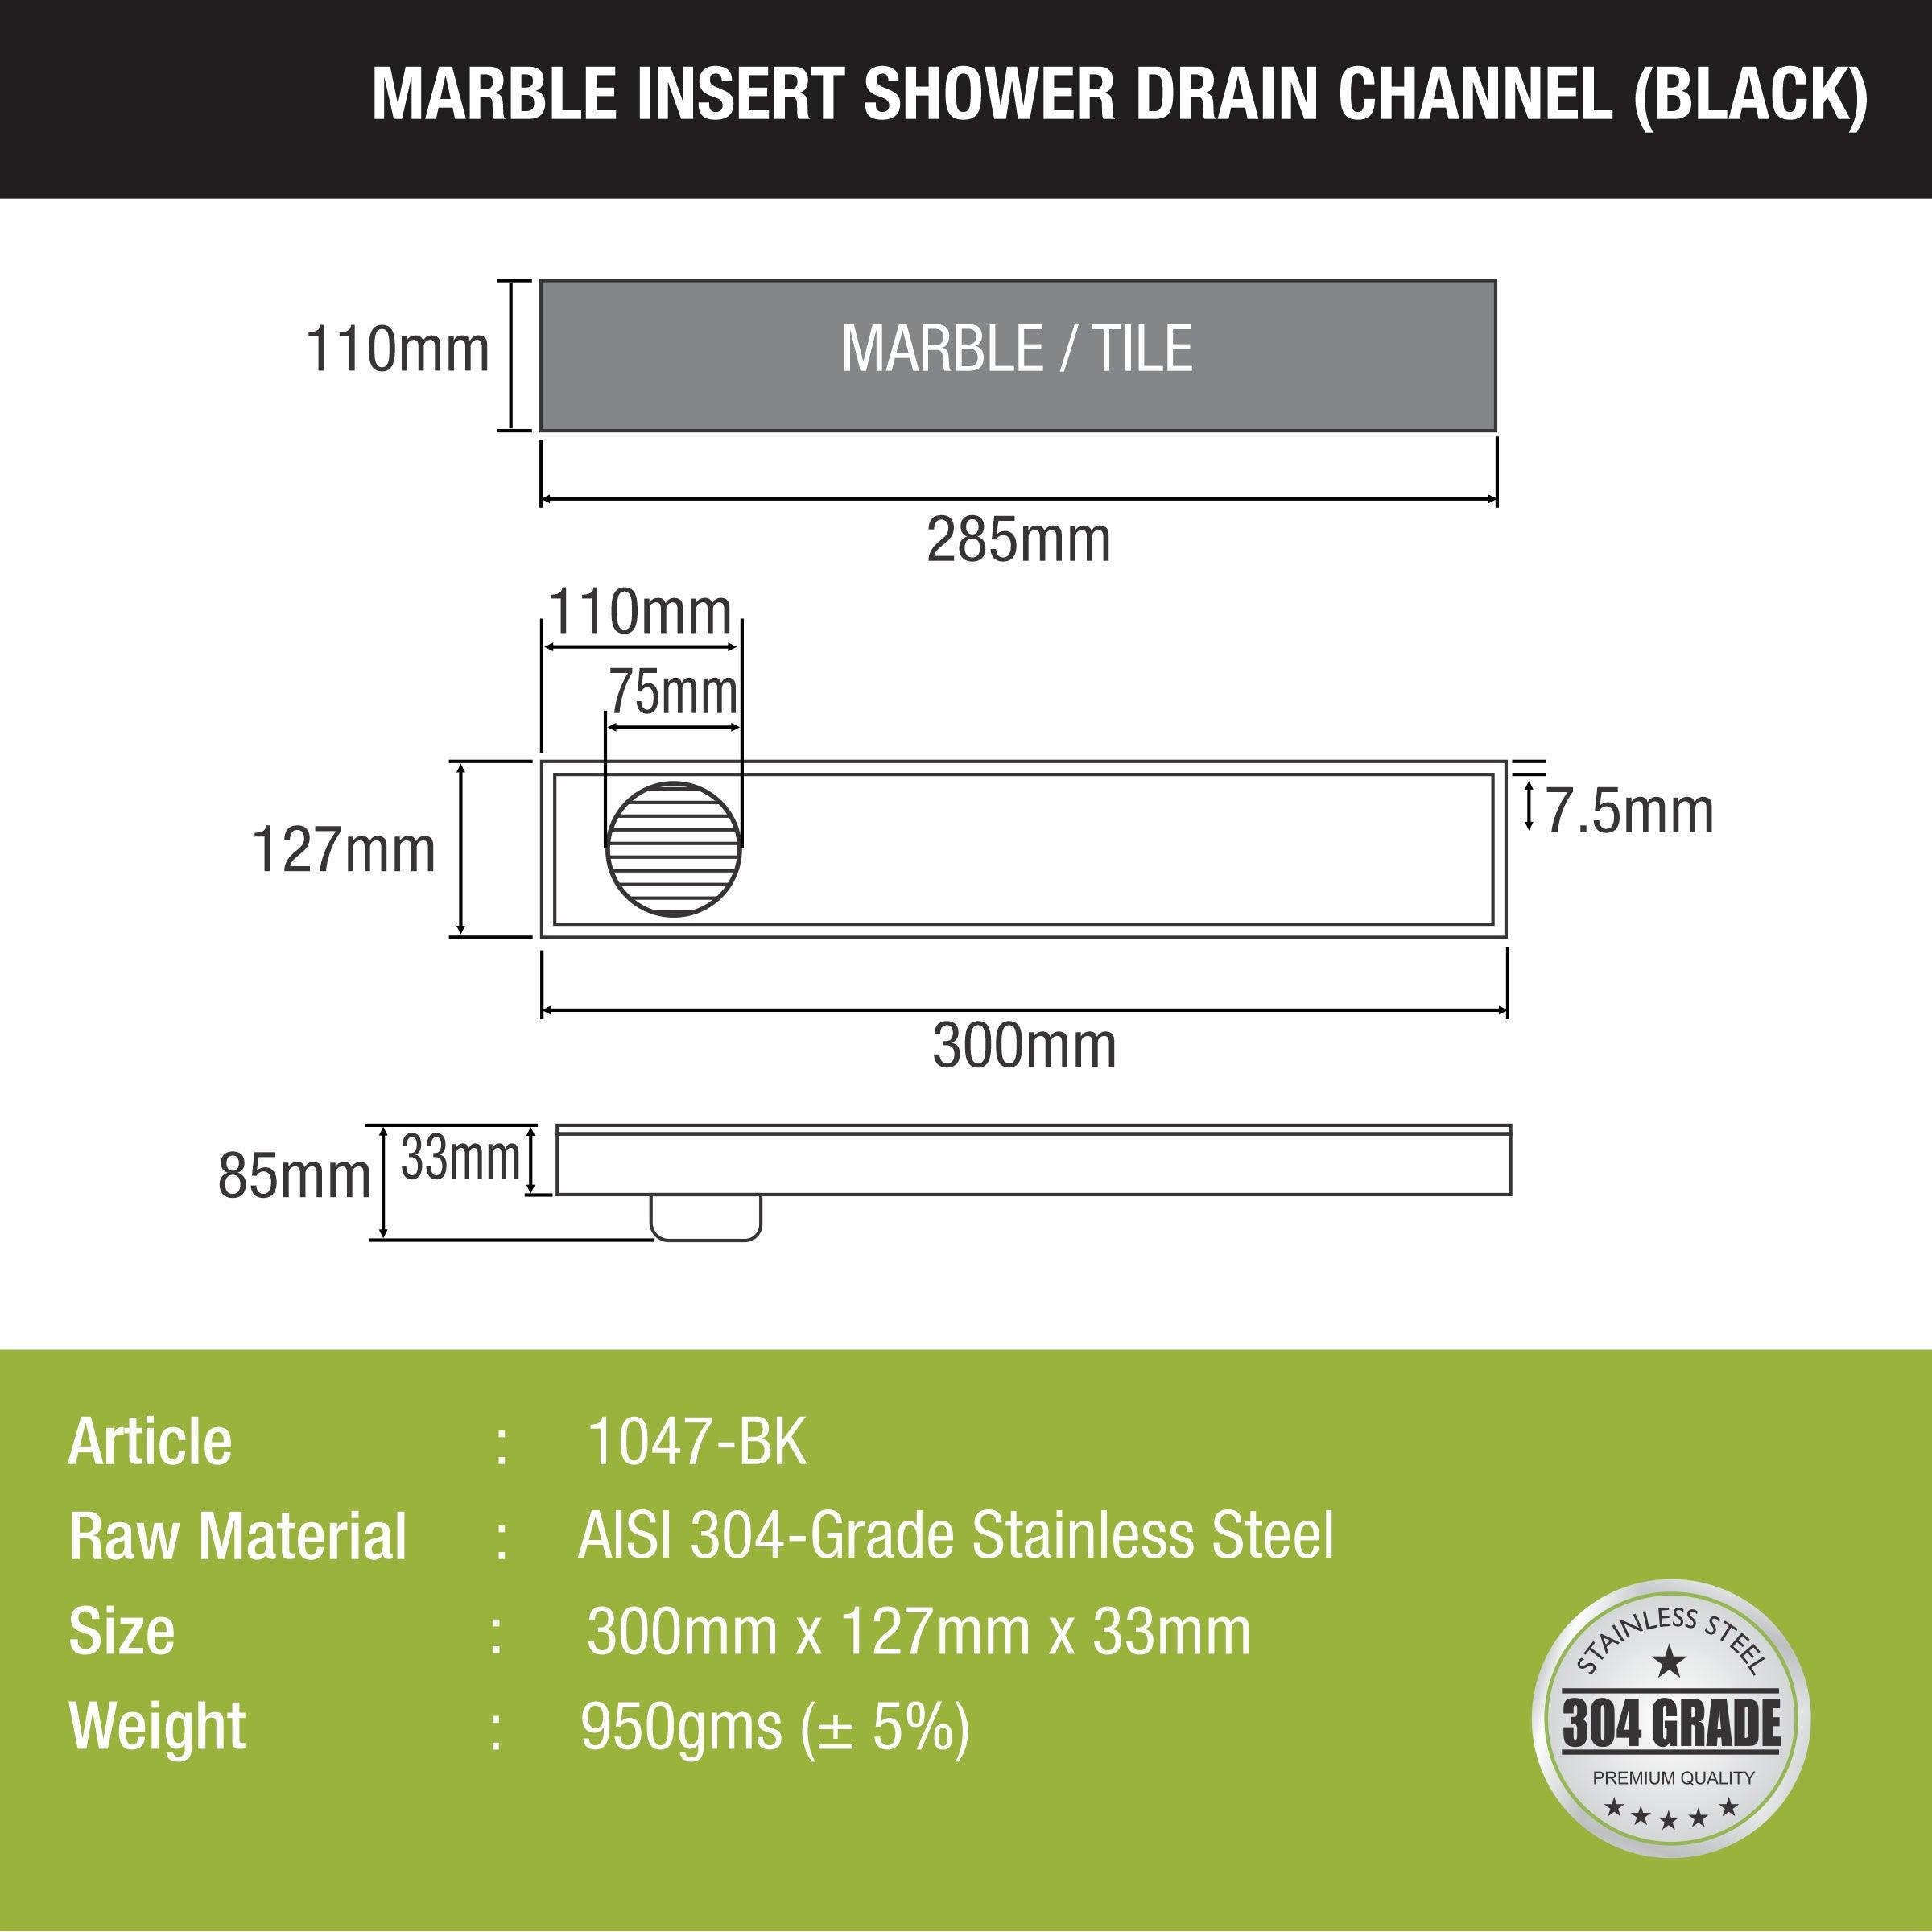 Marble Insert Shower Drain Channel - Black (12 x 5 Inches) size and measurement 